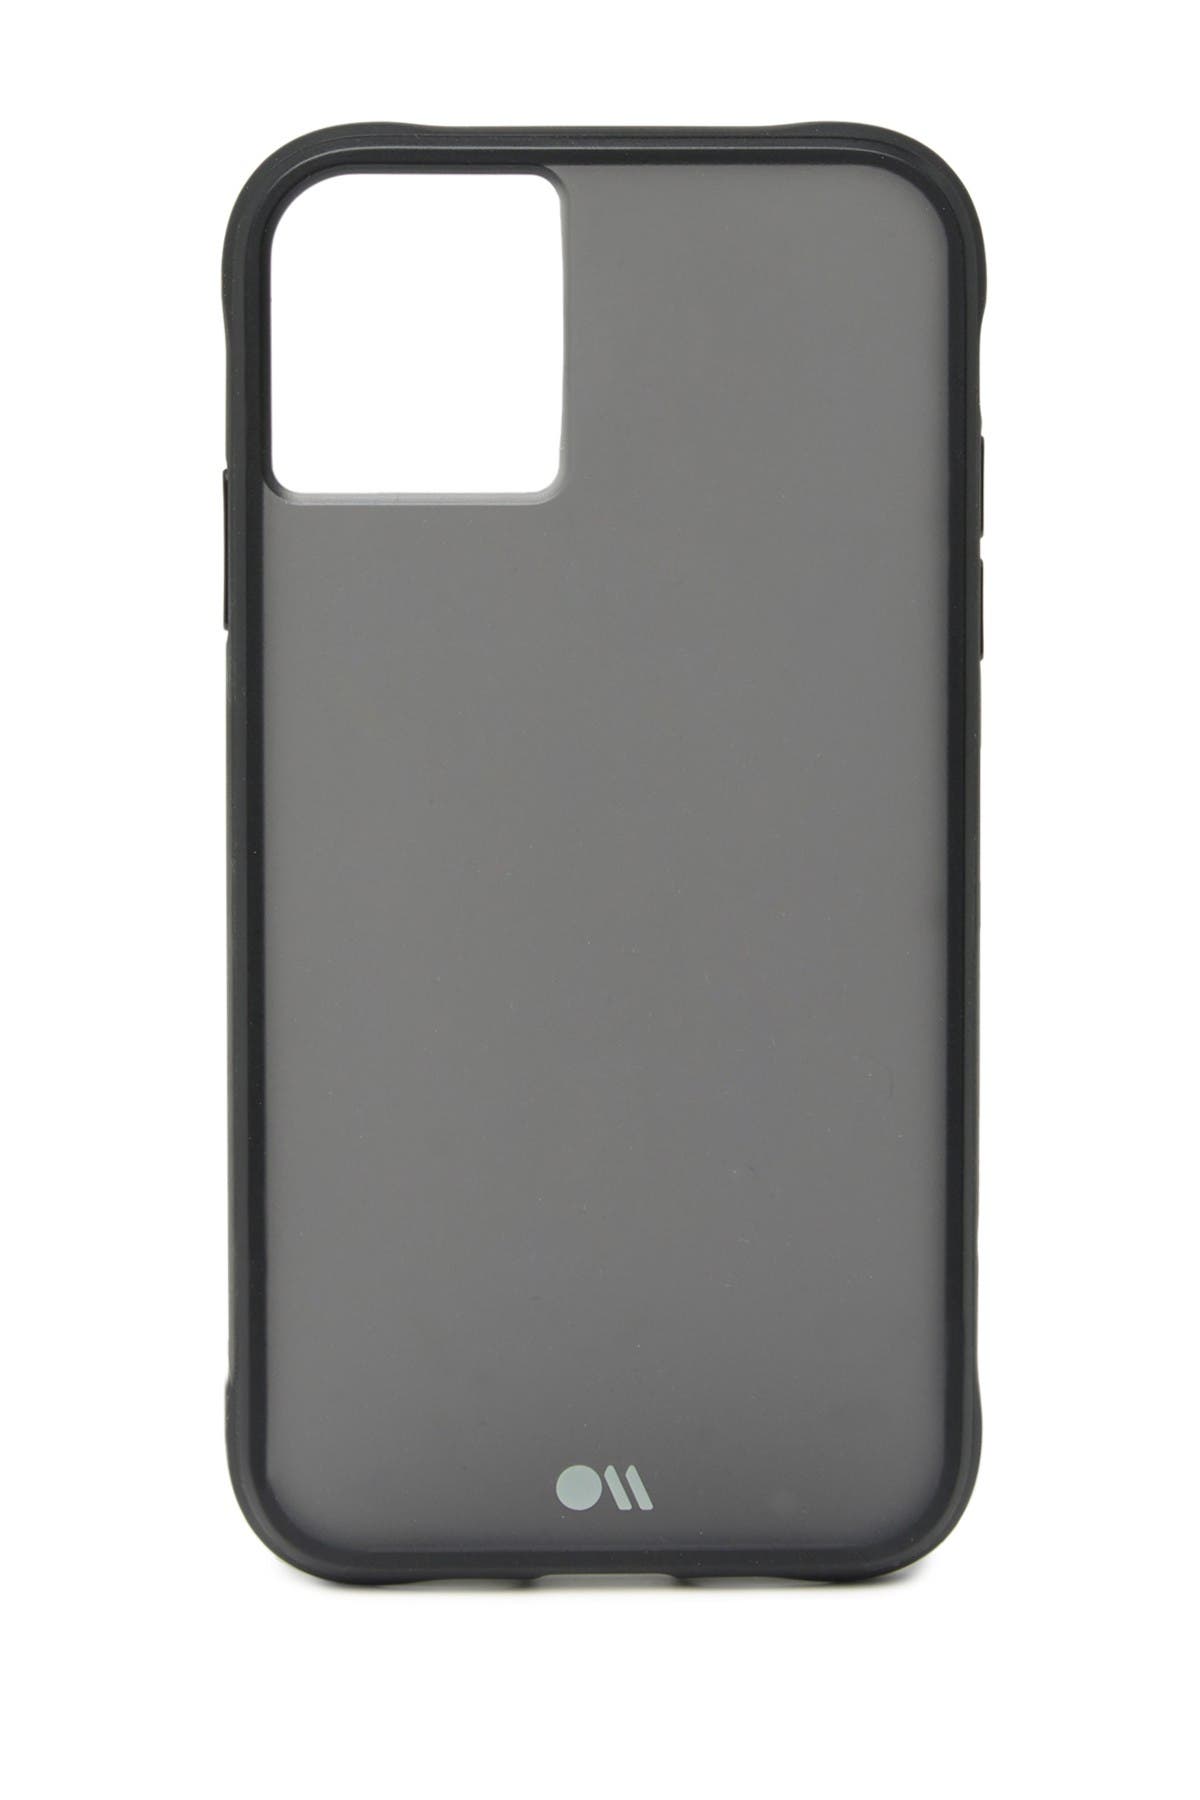 Case-mate Protection Pack Iphone 11 Case